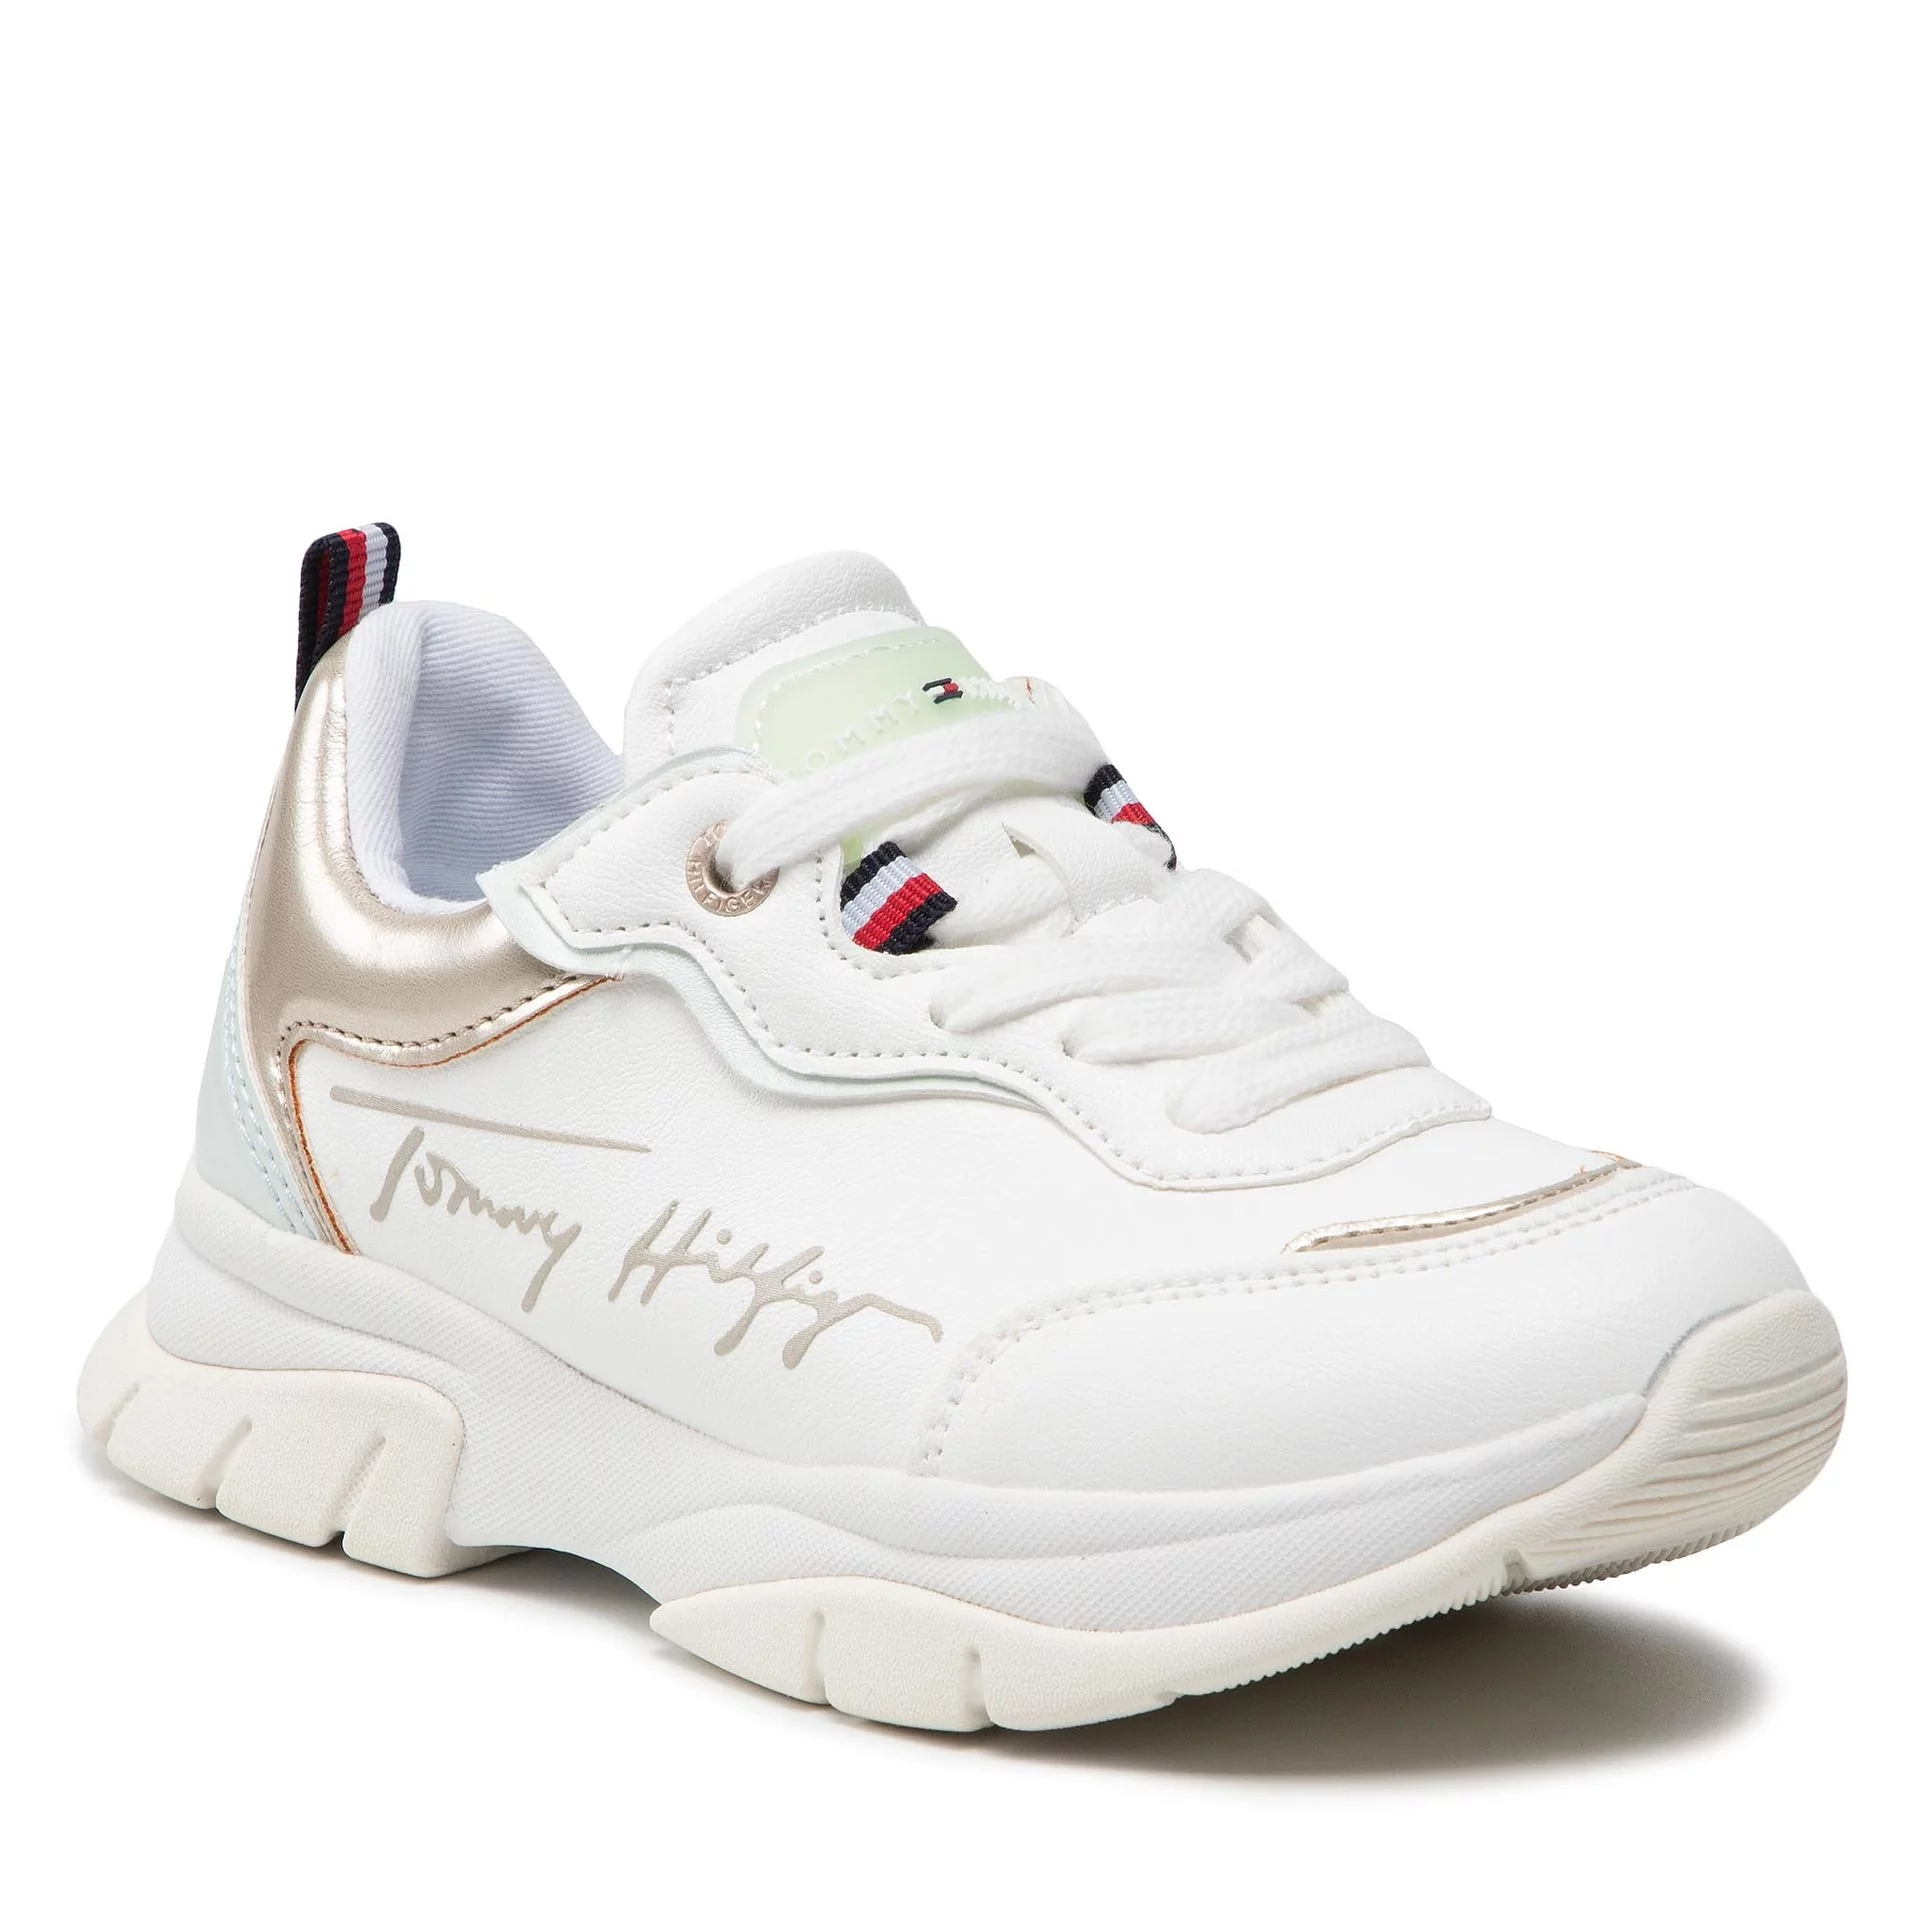 TOMMY HILFIGER Sneakersy Low Cut Lace-Up Sneaker T3A4-32164-0289  White/Platinum X048 - Ceny i opinie na Skapiec.pl